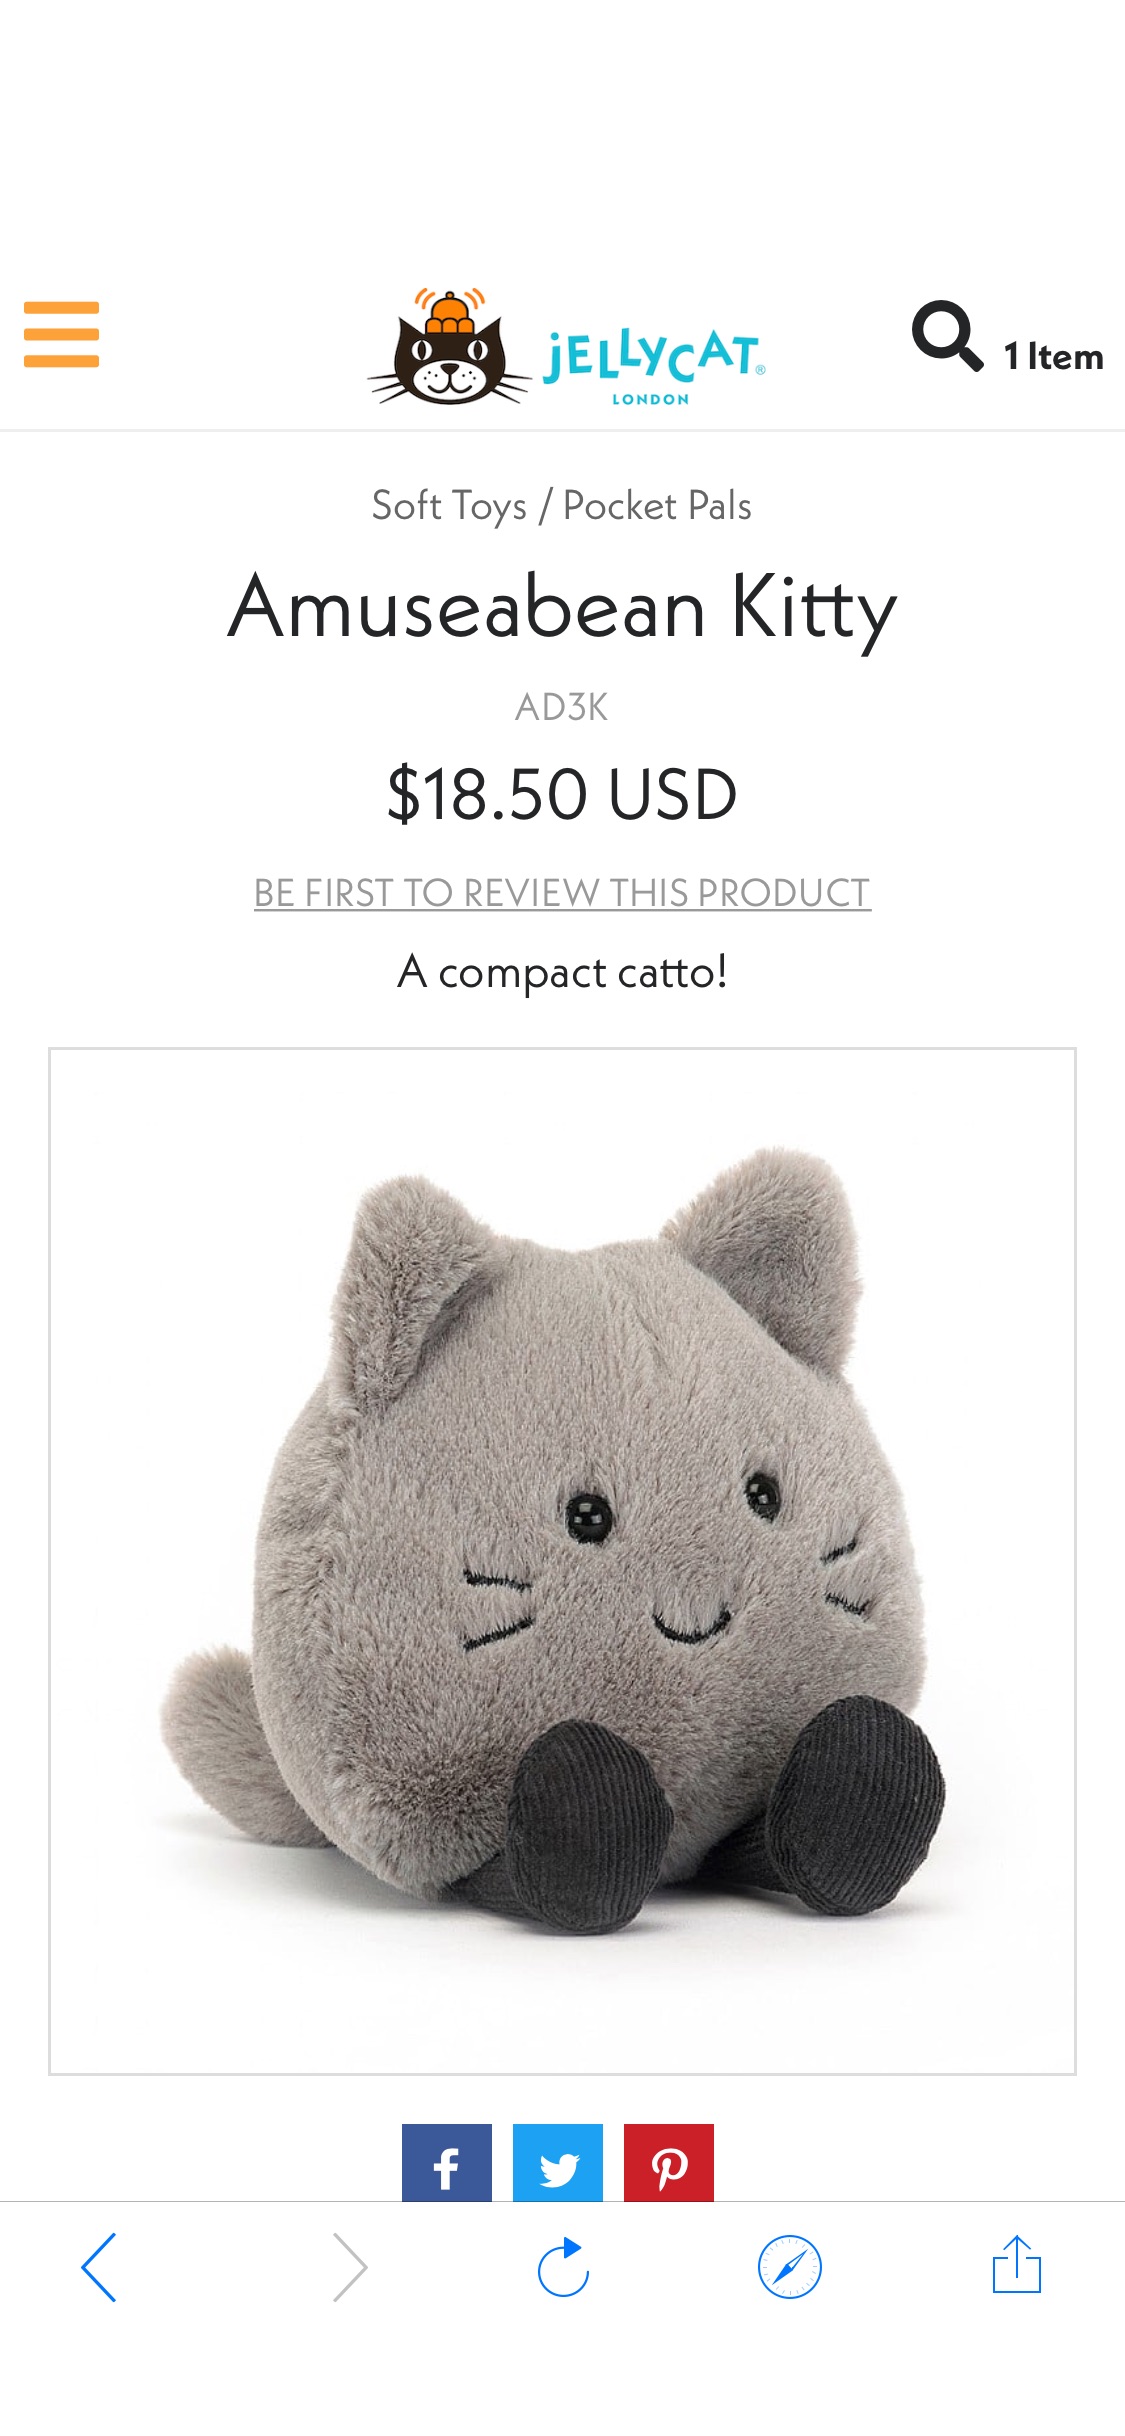 Buy Amuseabean Kitty - Online at Jellycat.com